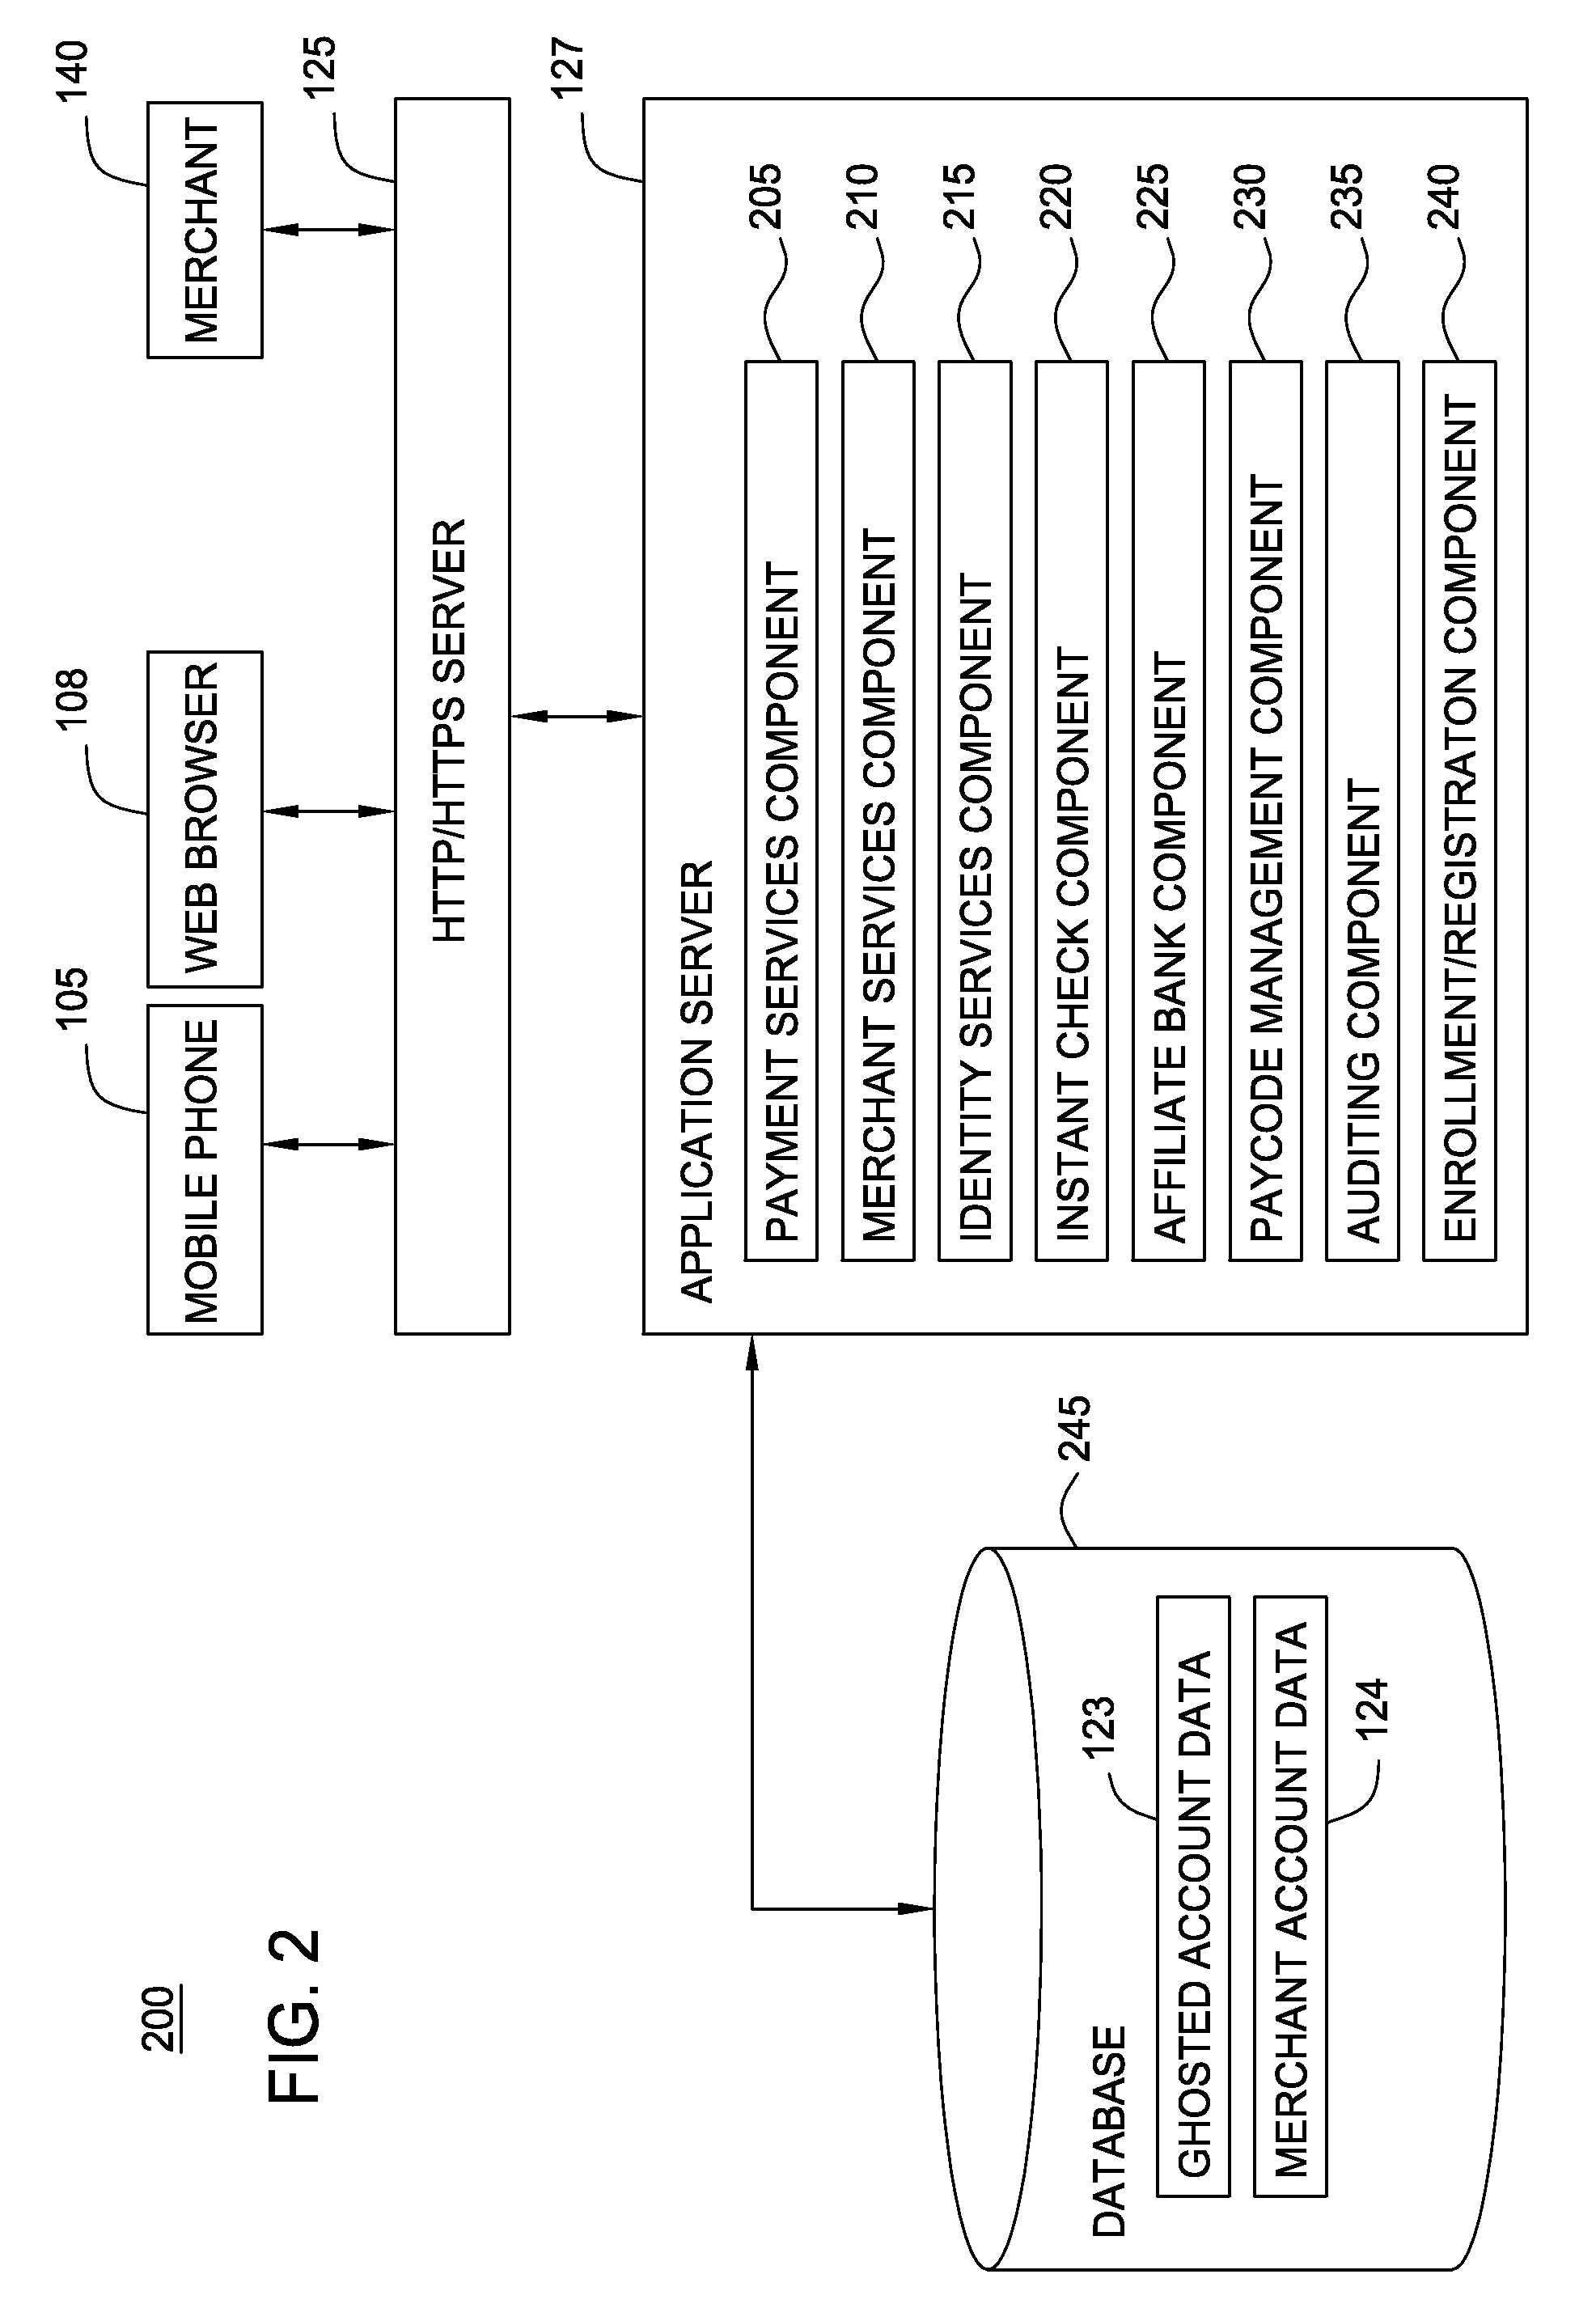 Transaction server configured to authorize payment transactions using mobile telephone devices